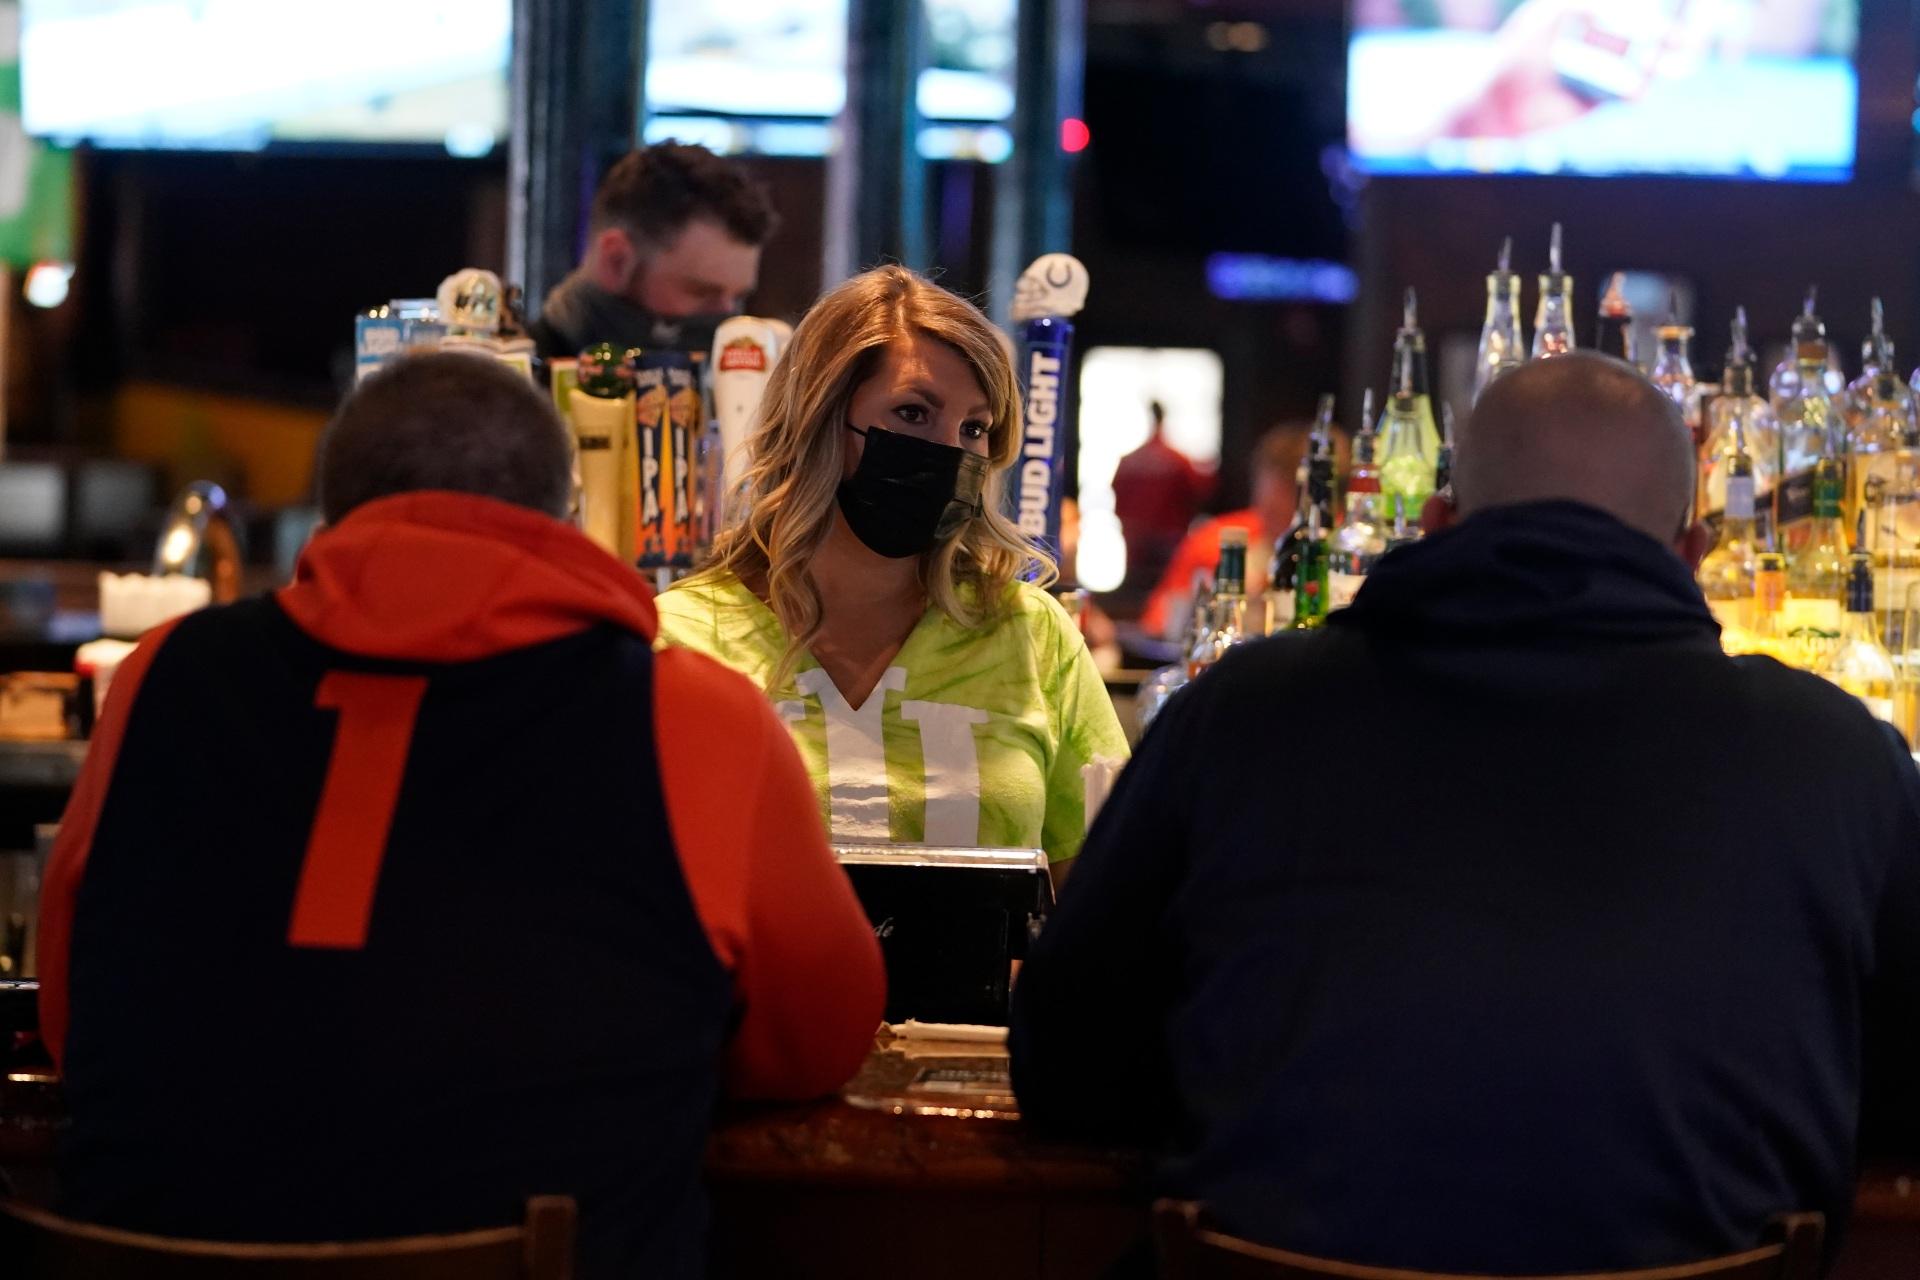 Jillian Smith takes an order from people at Kilroy’s Bar & Grill, Sunday, March 14, 2021, in Indianapolis. (AP Photo / Darron Cummings)